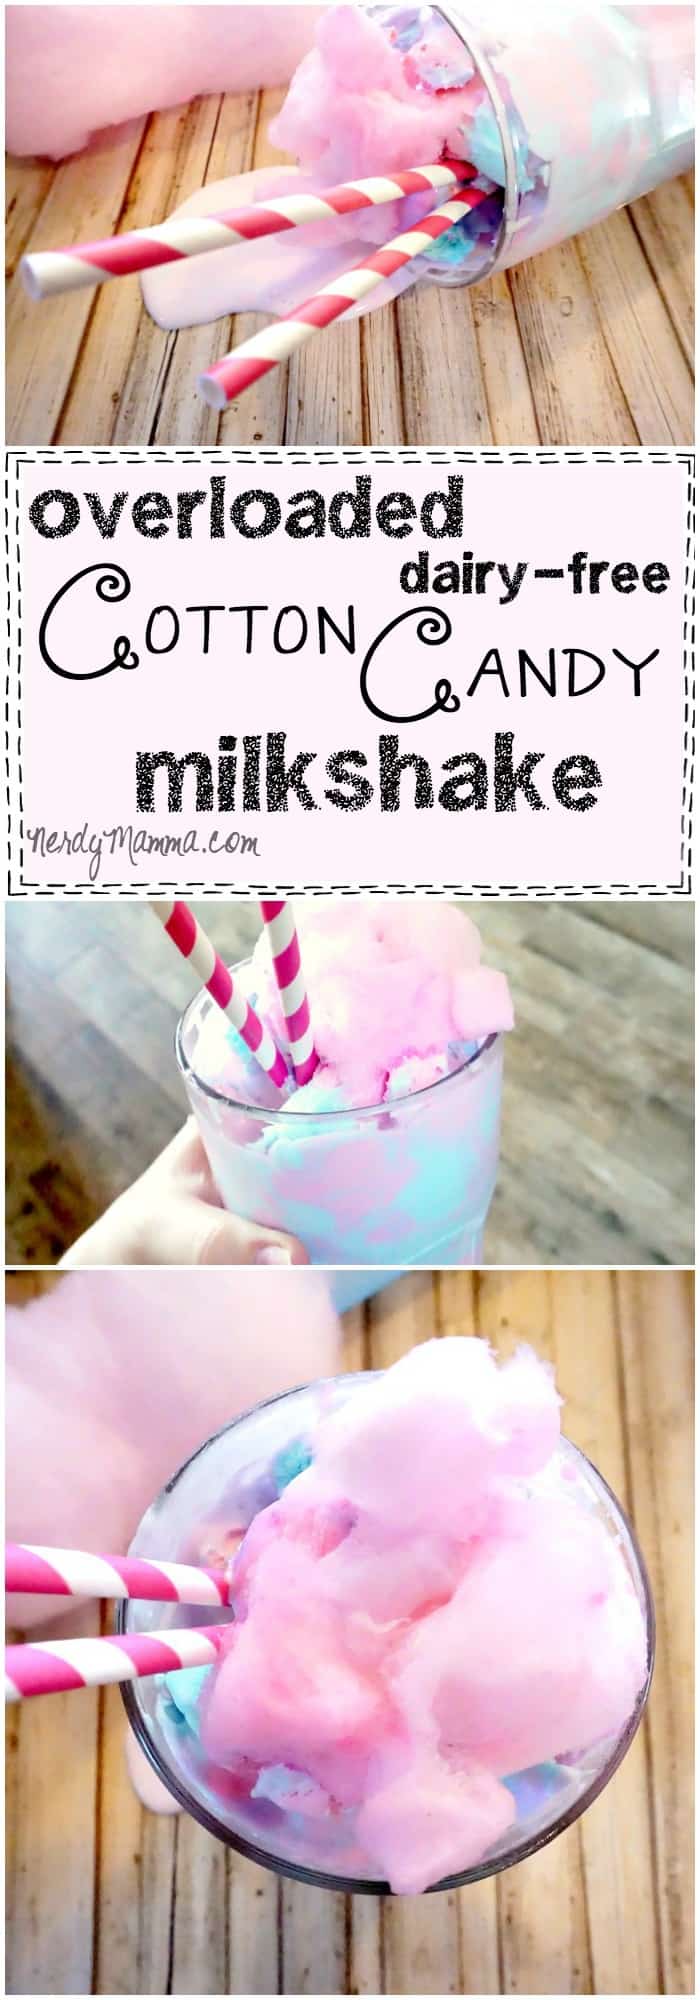 Oh, man, this recipe for Overloaded Dary-Free Cotton Candy Milkshake sounds so fabulous. I love that it's gluten-free, vegan and flavored like cotton candy!